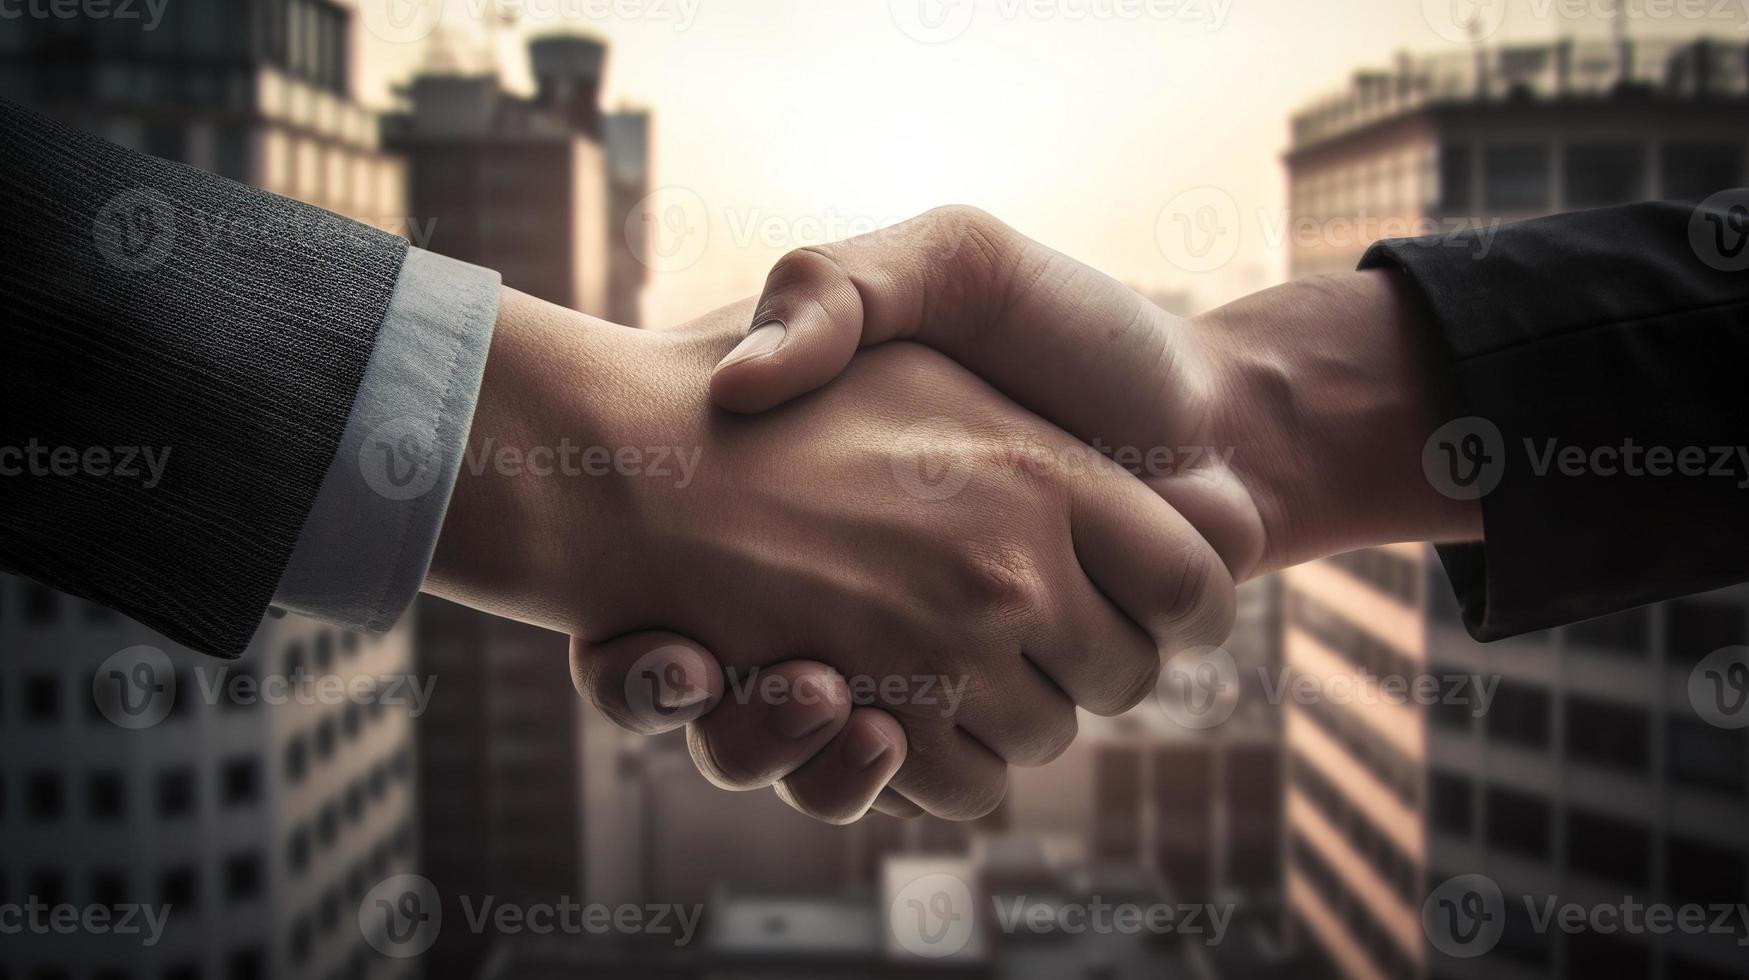 Close-up image of business people shaking hands at meeting or negotiation,Handshake concept,Business concept photo